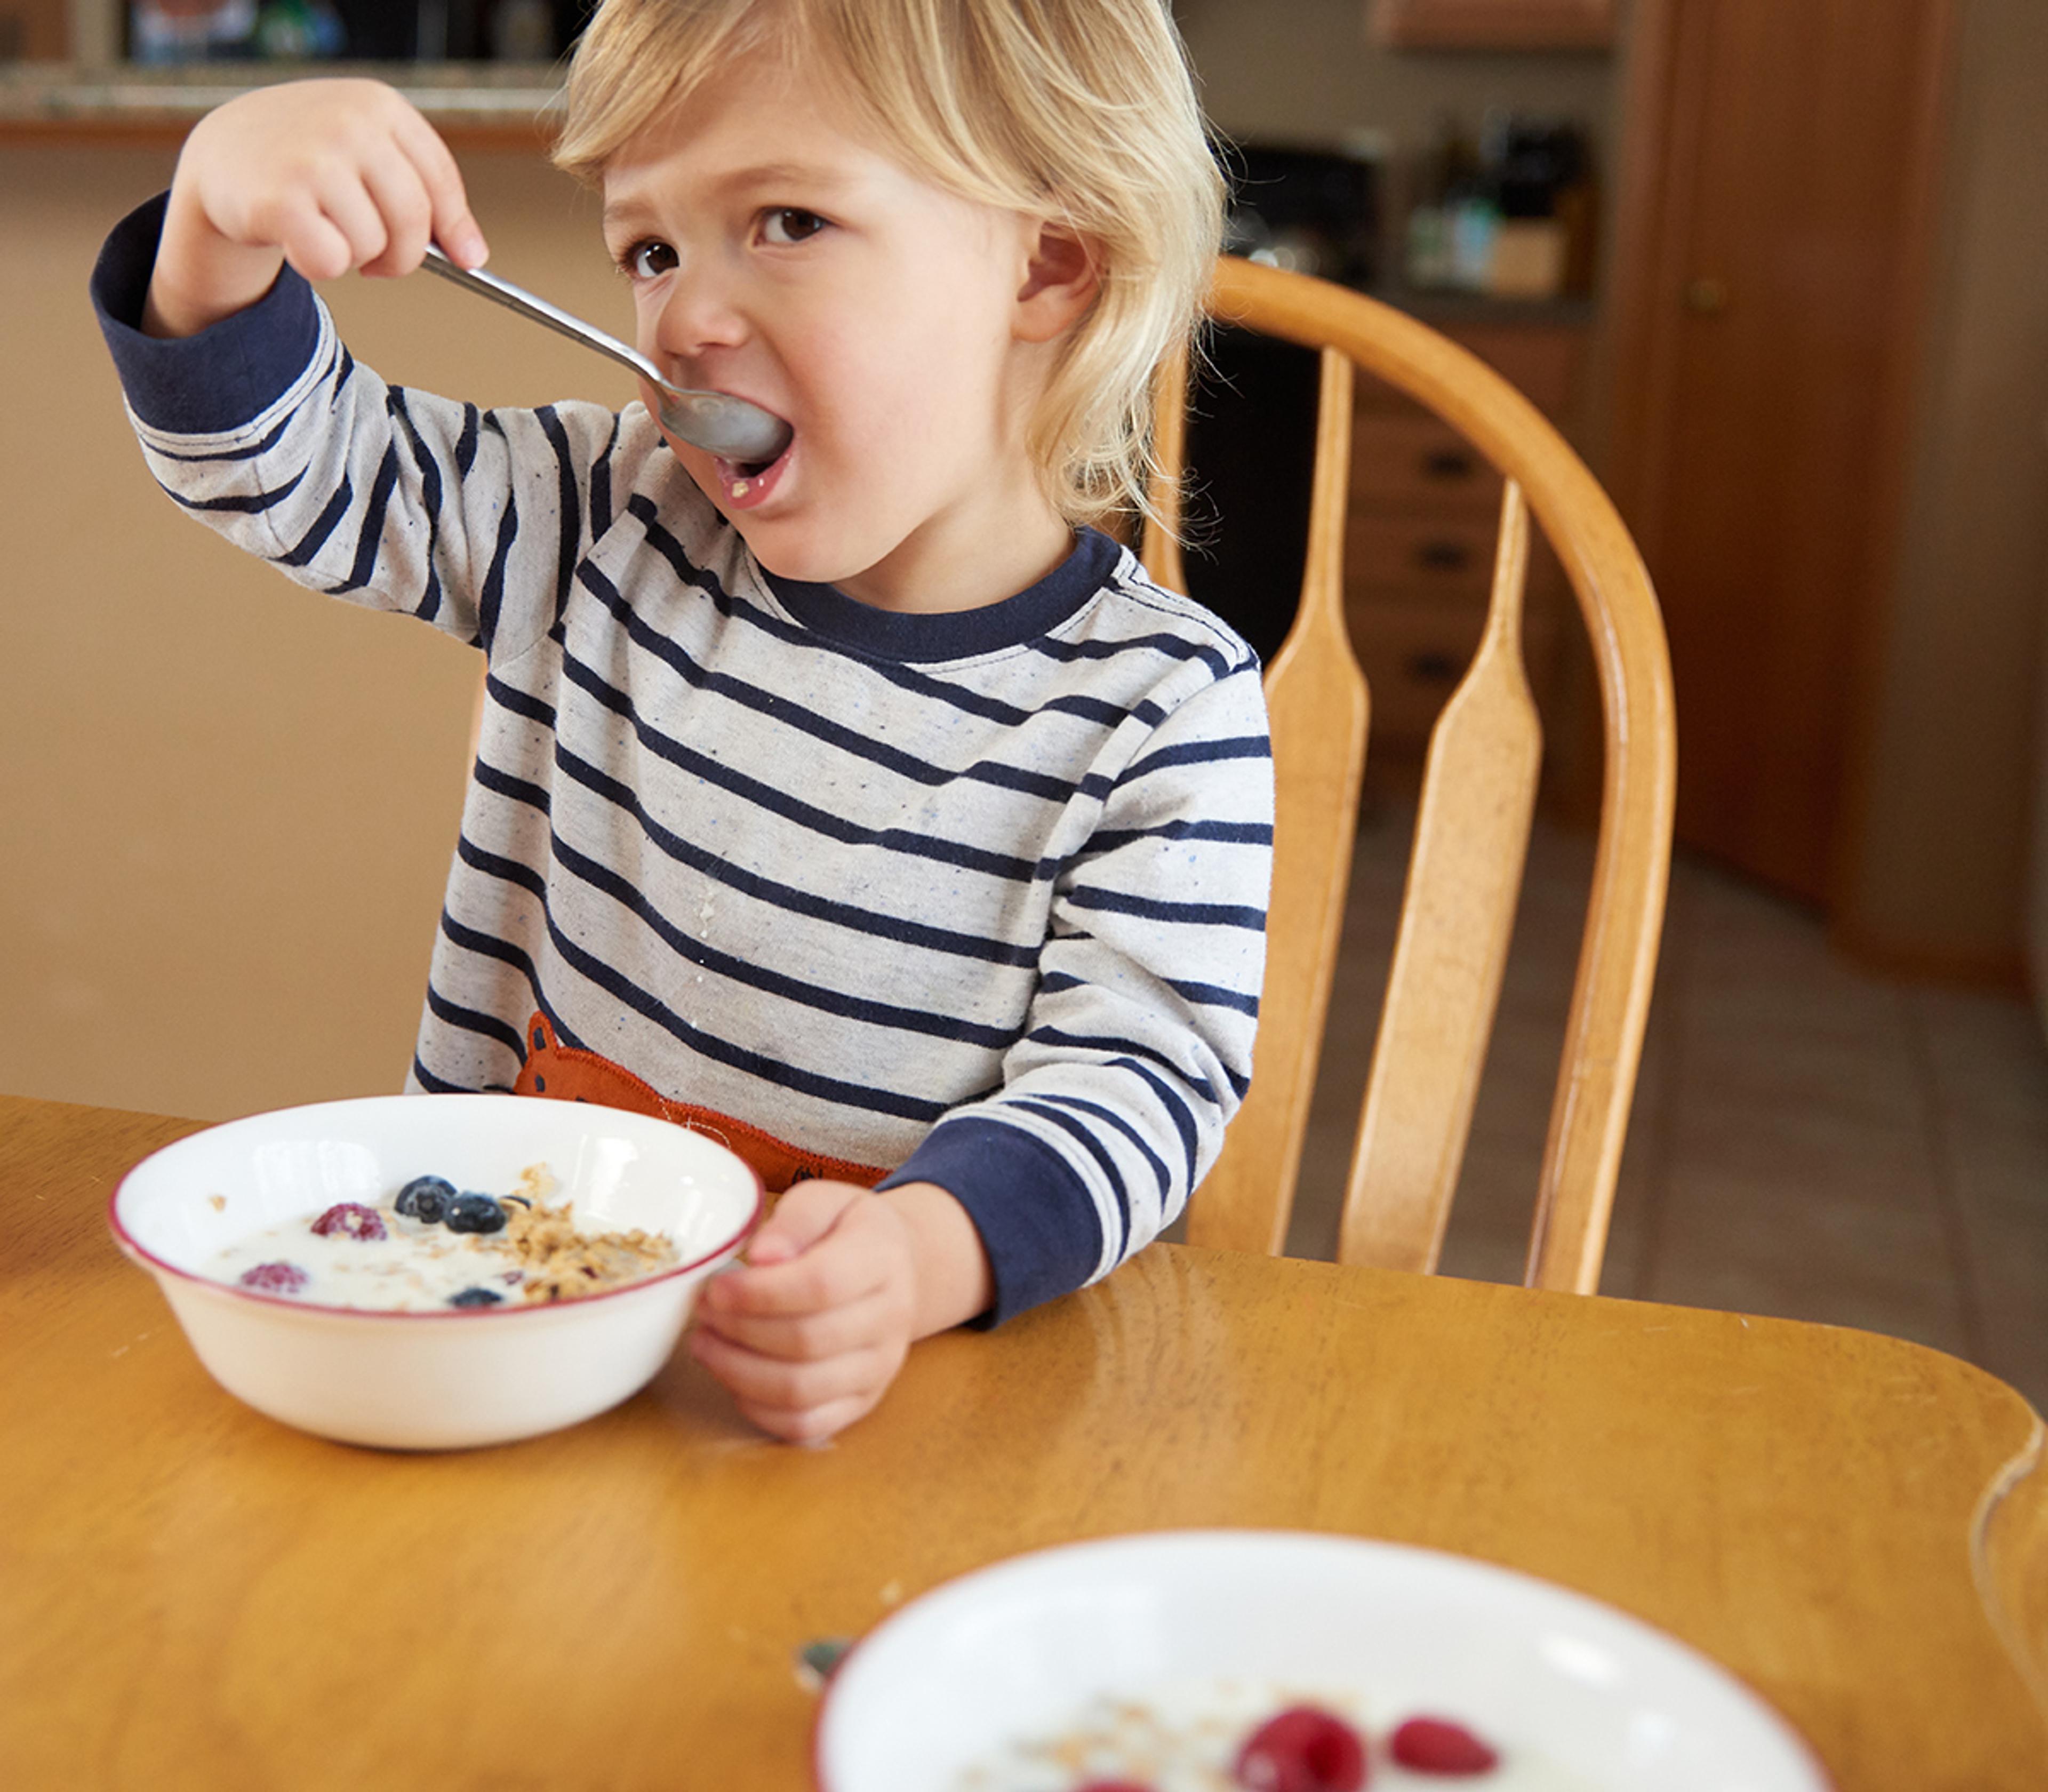 Young boy enjoys a bowl of milk and cereal for breakfast.